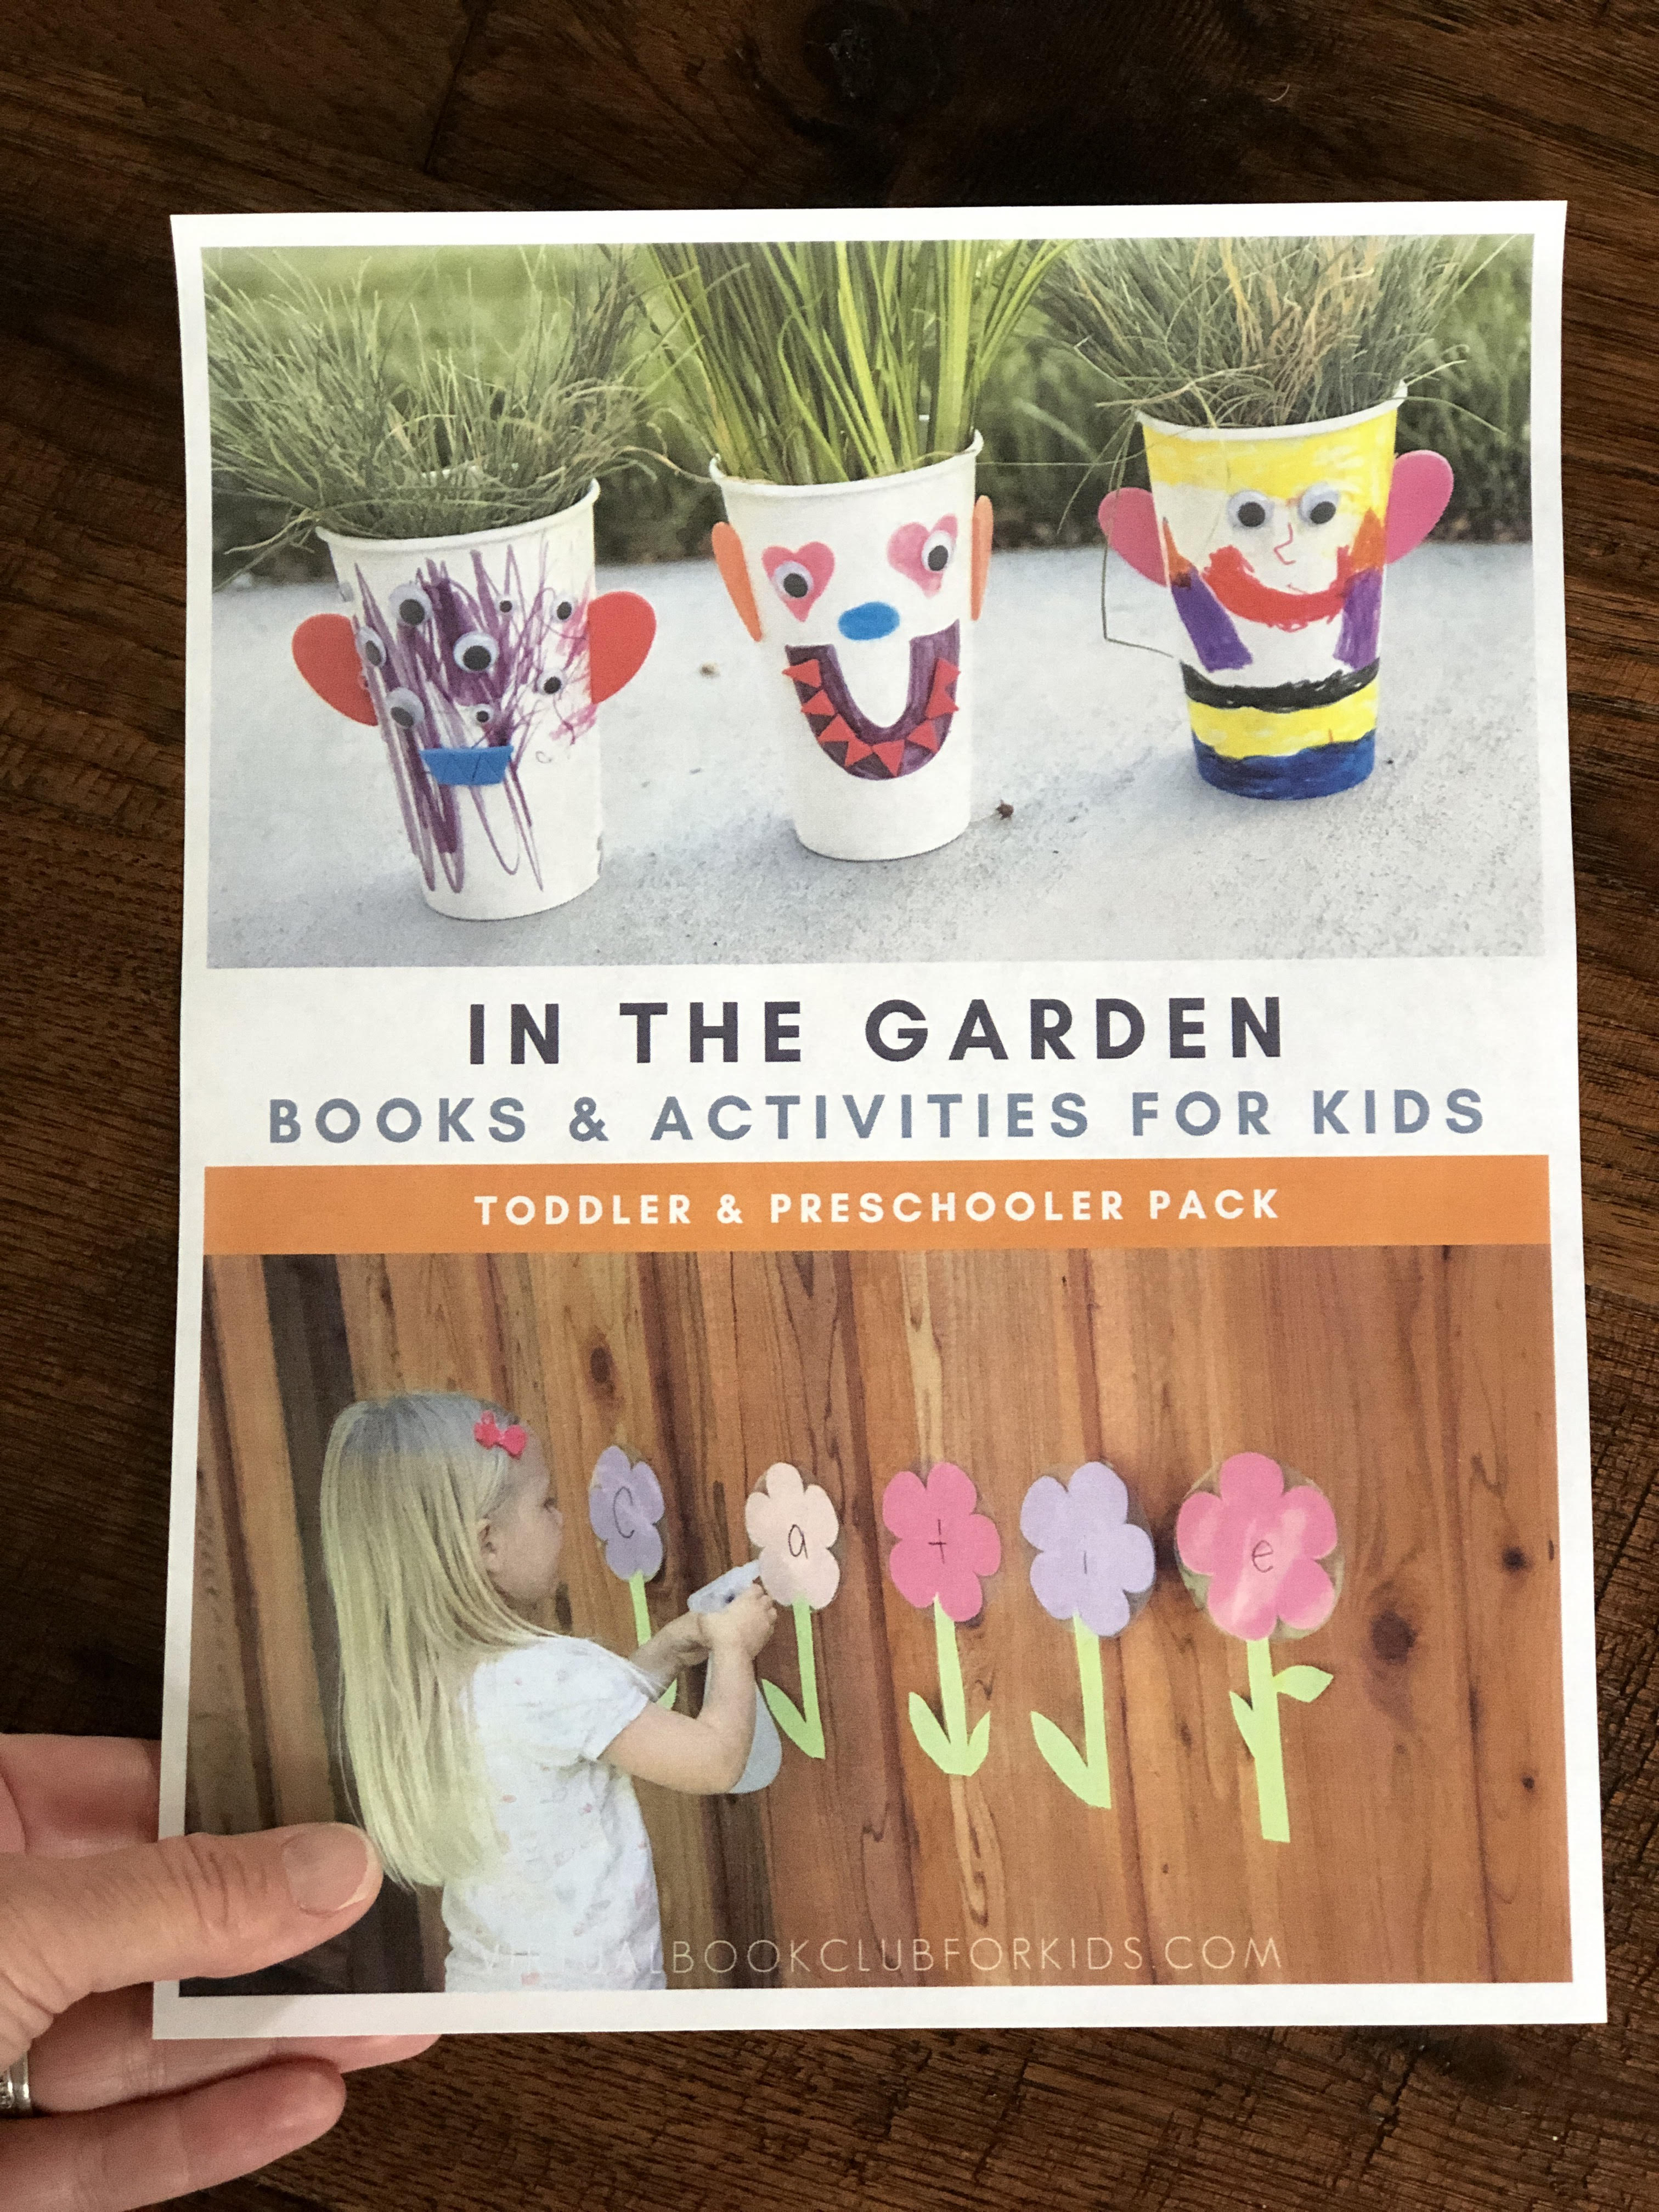 In the garden mini pack from the Virtual Book Club for Kids for toddlers and preschoolers